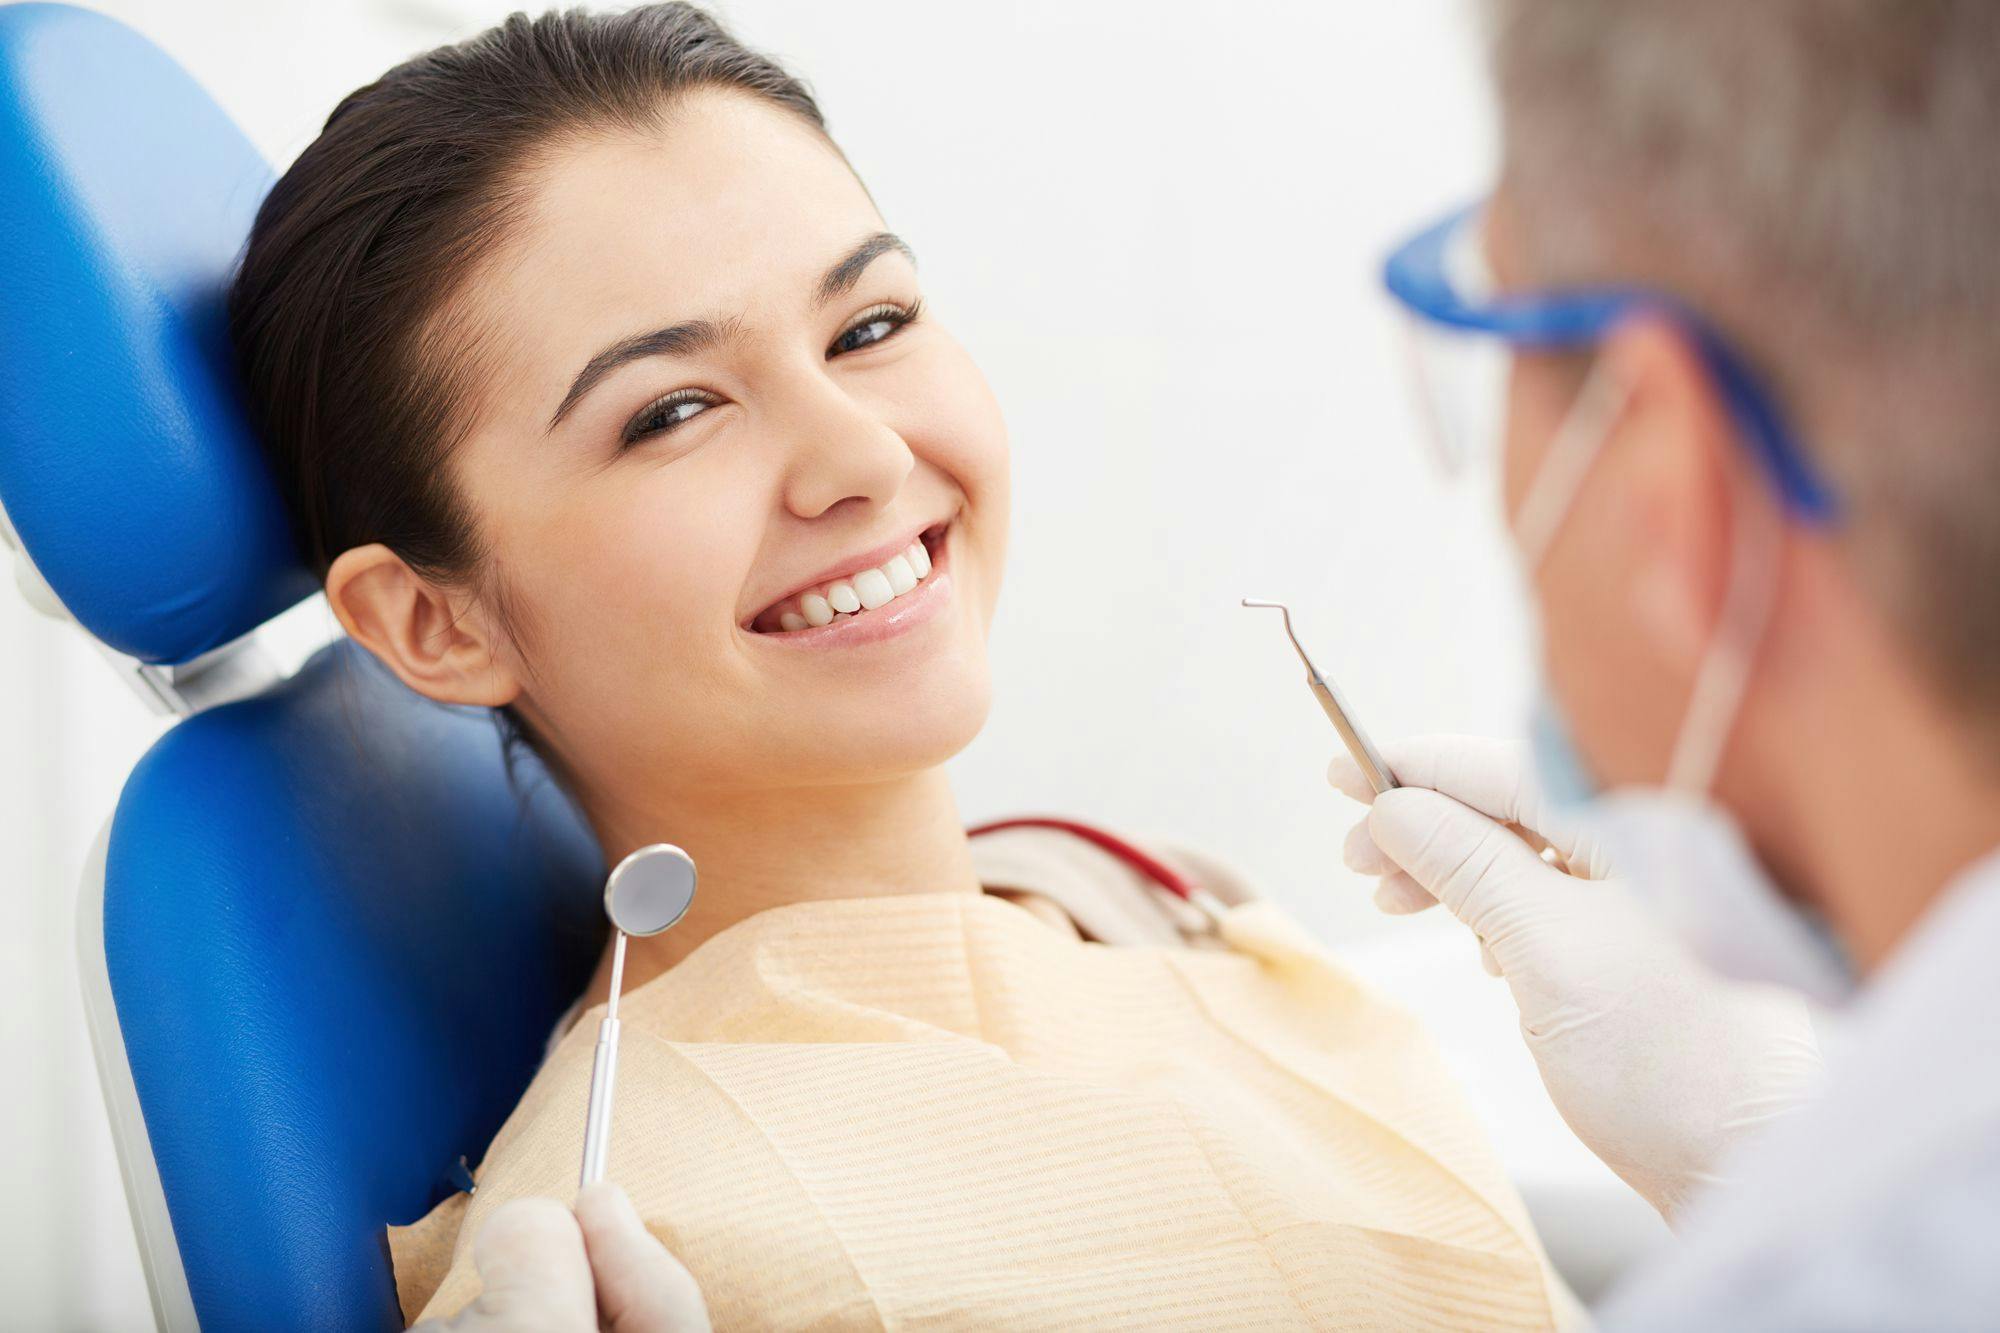 Rising to Their Expectations: How to Keep Patients Smiling in the Dental Chair. Photo courtesy of pressmaster/stock.adobe.com. 